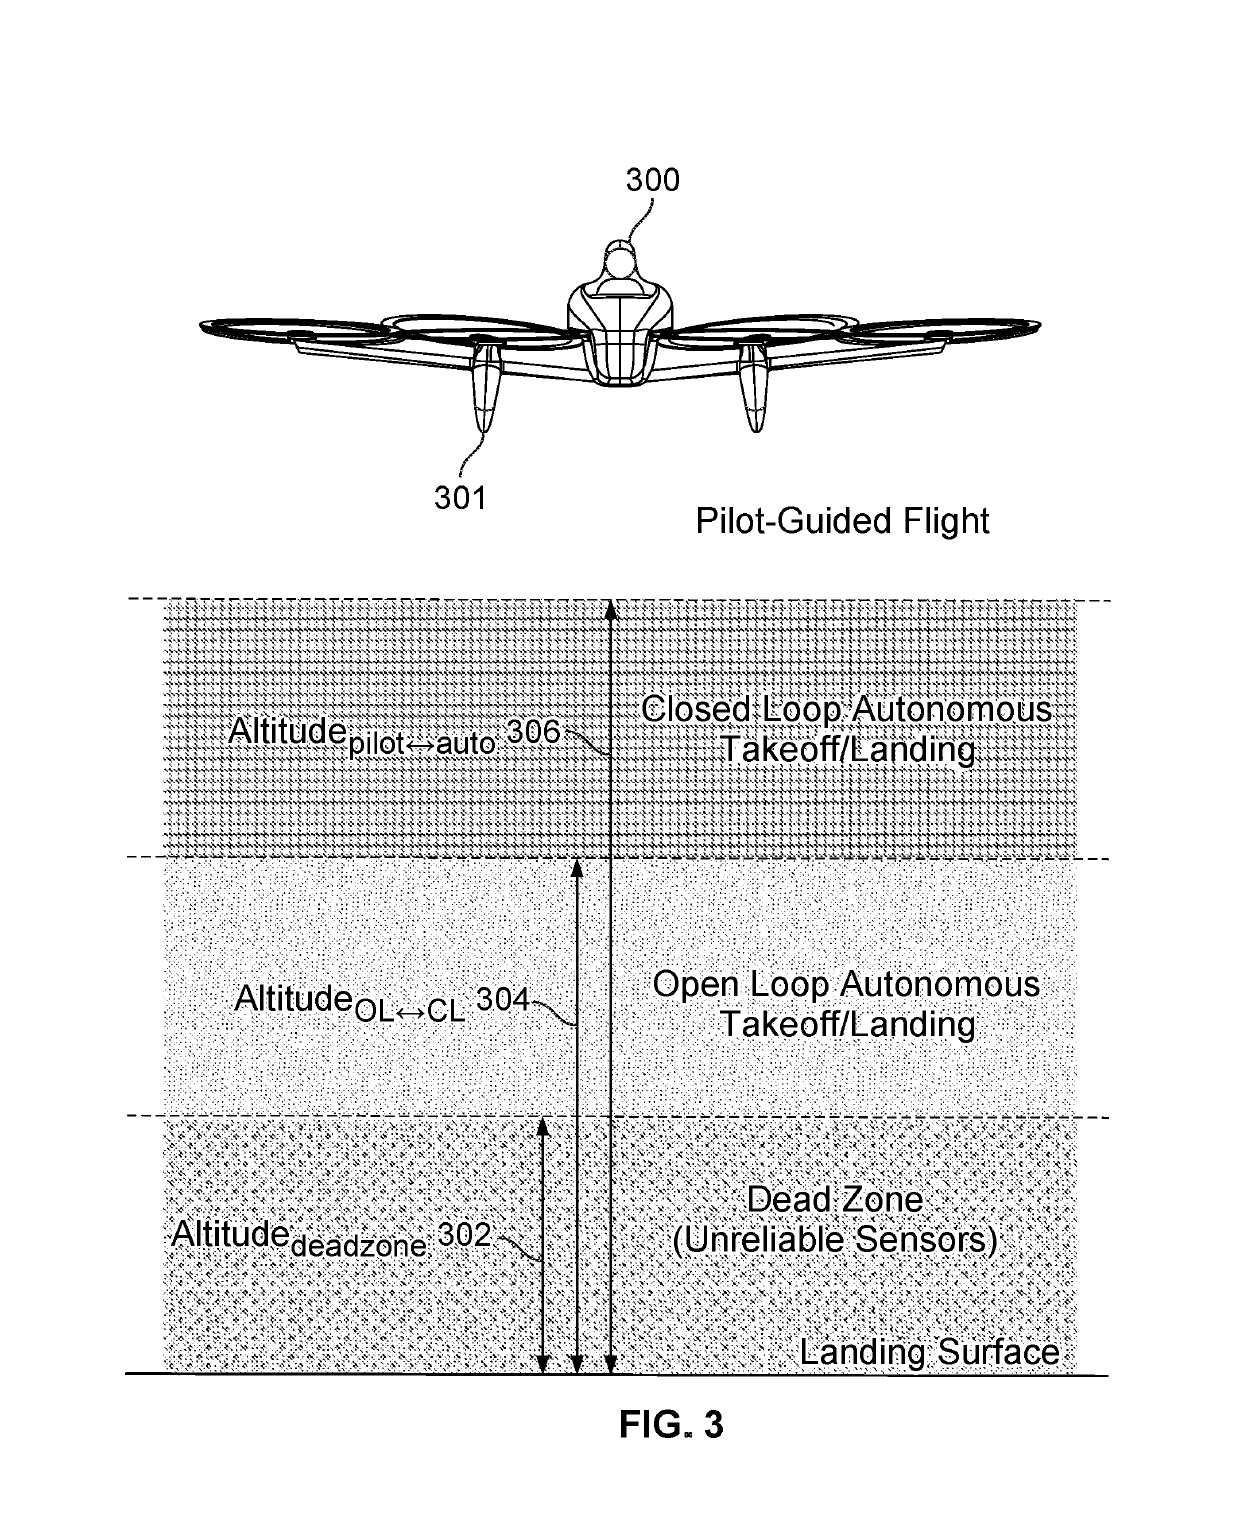 Autonomous takeoff and landing with open loop mode and closed loop mode